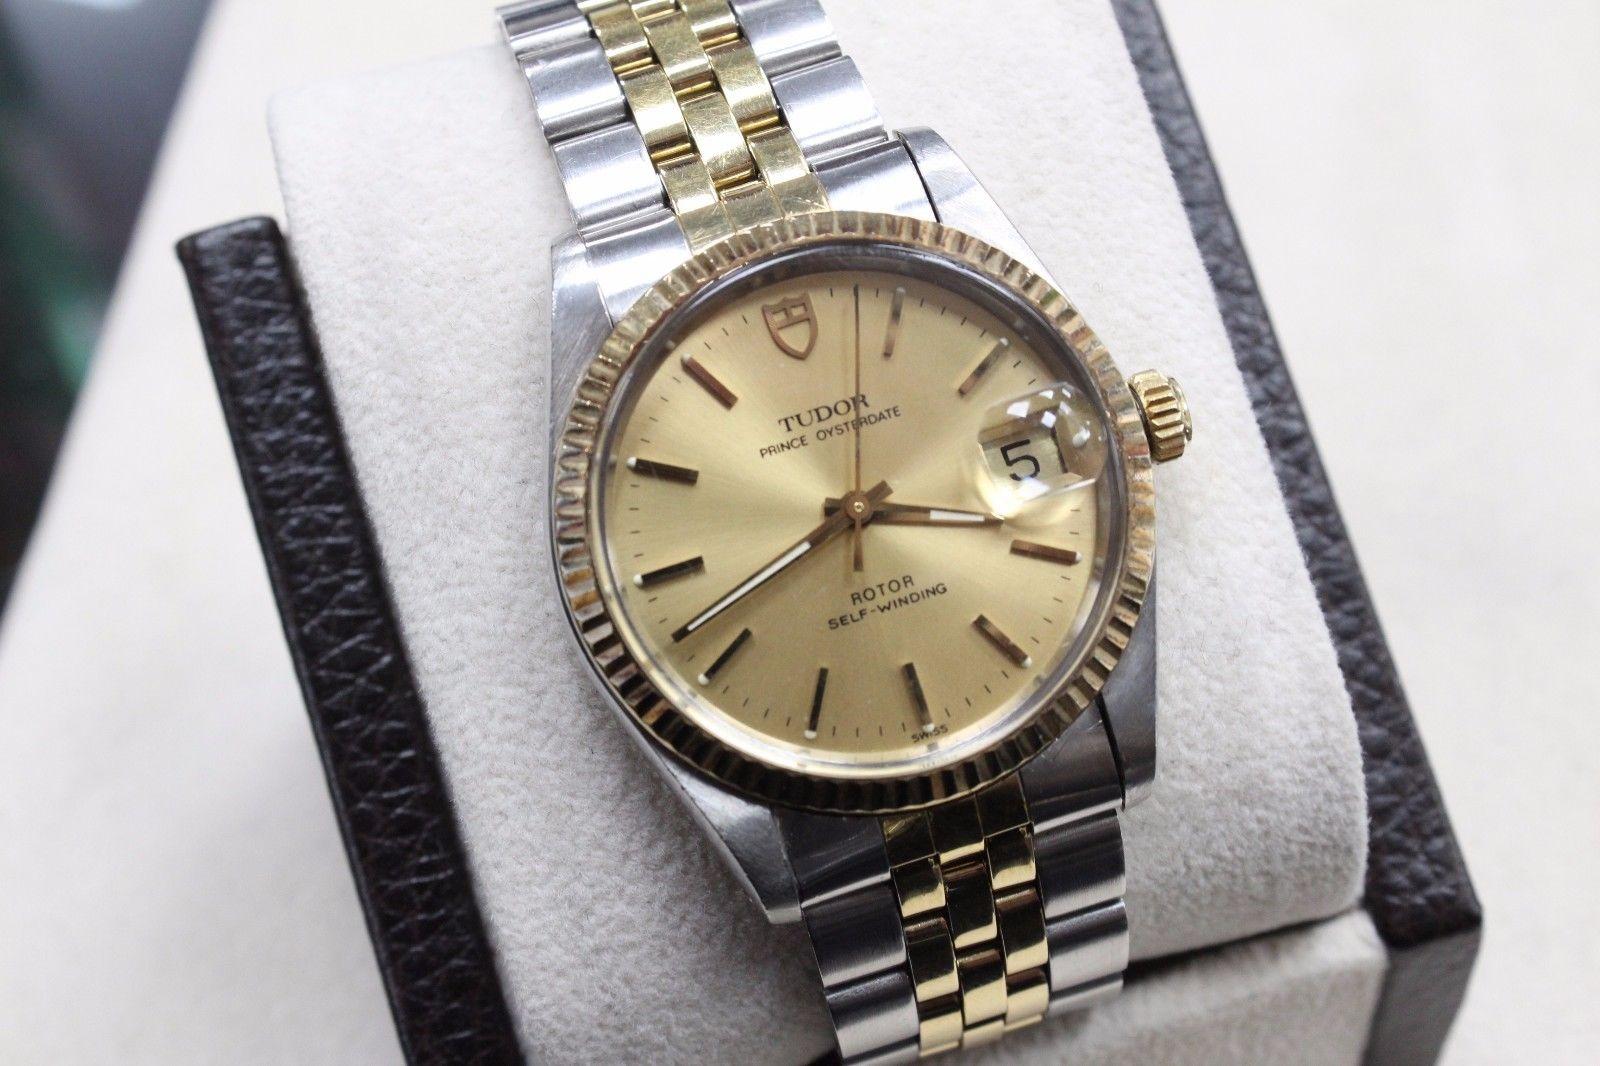 Style Number: 75203
Serial: 225***
Model: Prince Oyster Date
Case Material: Stainless Steel
Band: 14K Yellow Gold Plated & Stainless Steel
Bezel: 14K Yellow Gold
Dial: Champagne
Face: Acrylic
Case Size: 34mm
Includes: 
-Elegant Watch Box 
-Certified